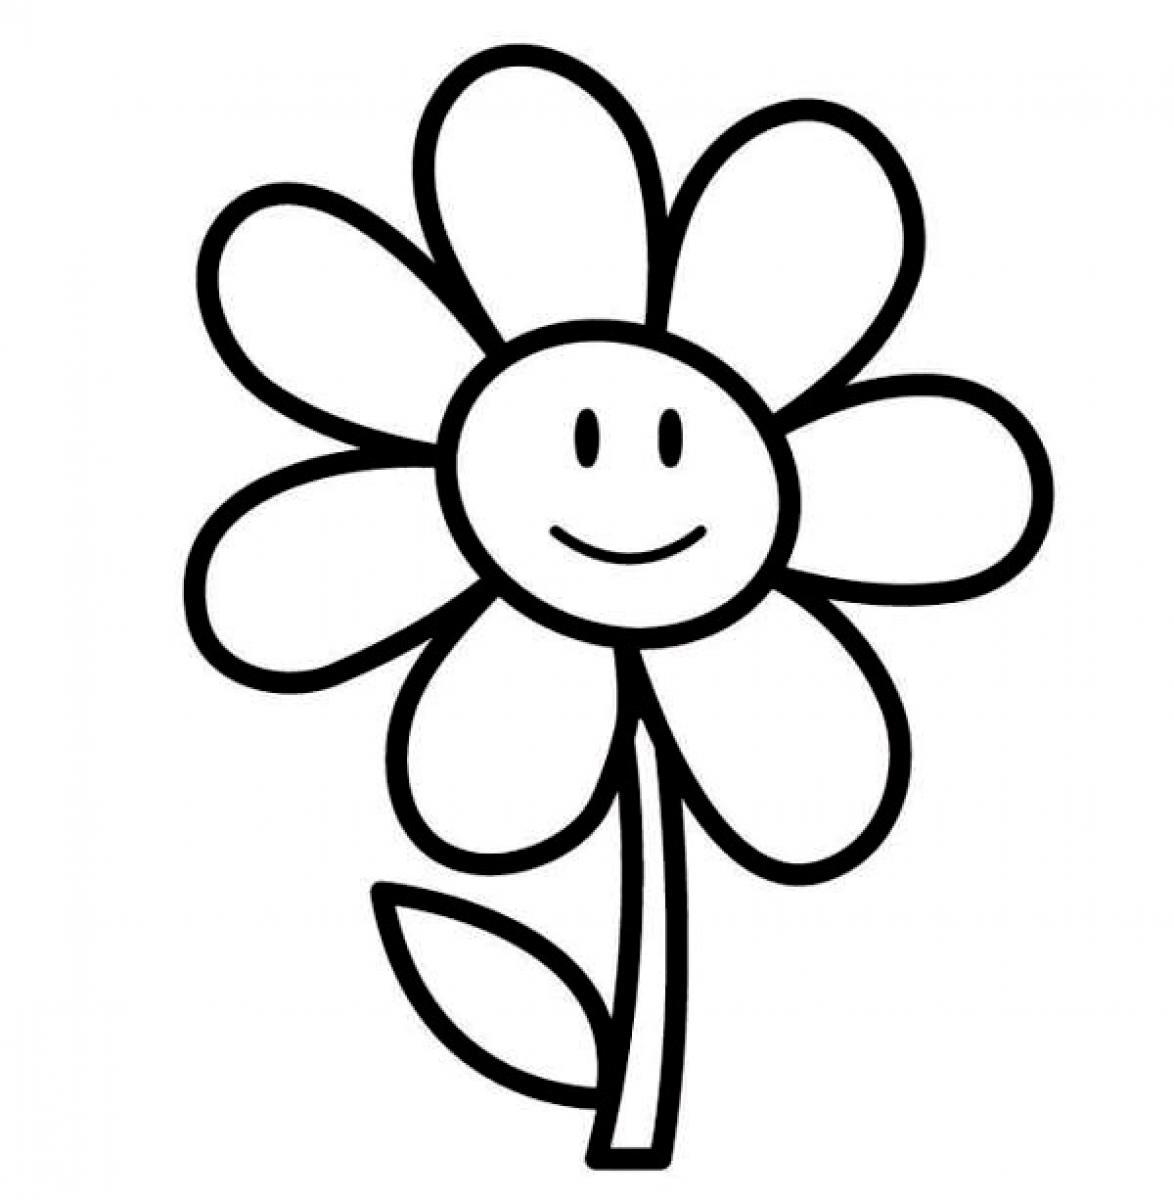 Easy Coloring Pages To Print | Coloring Pages